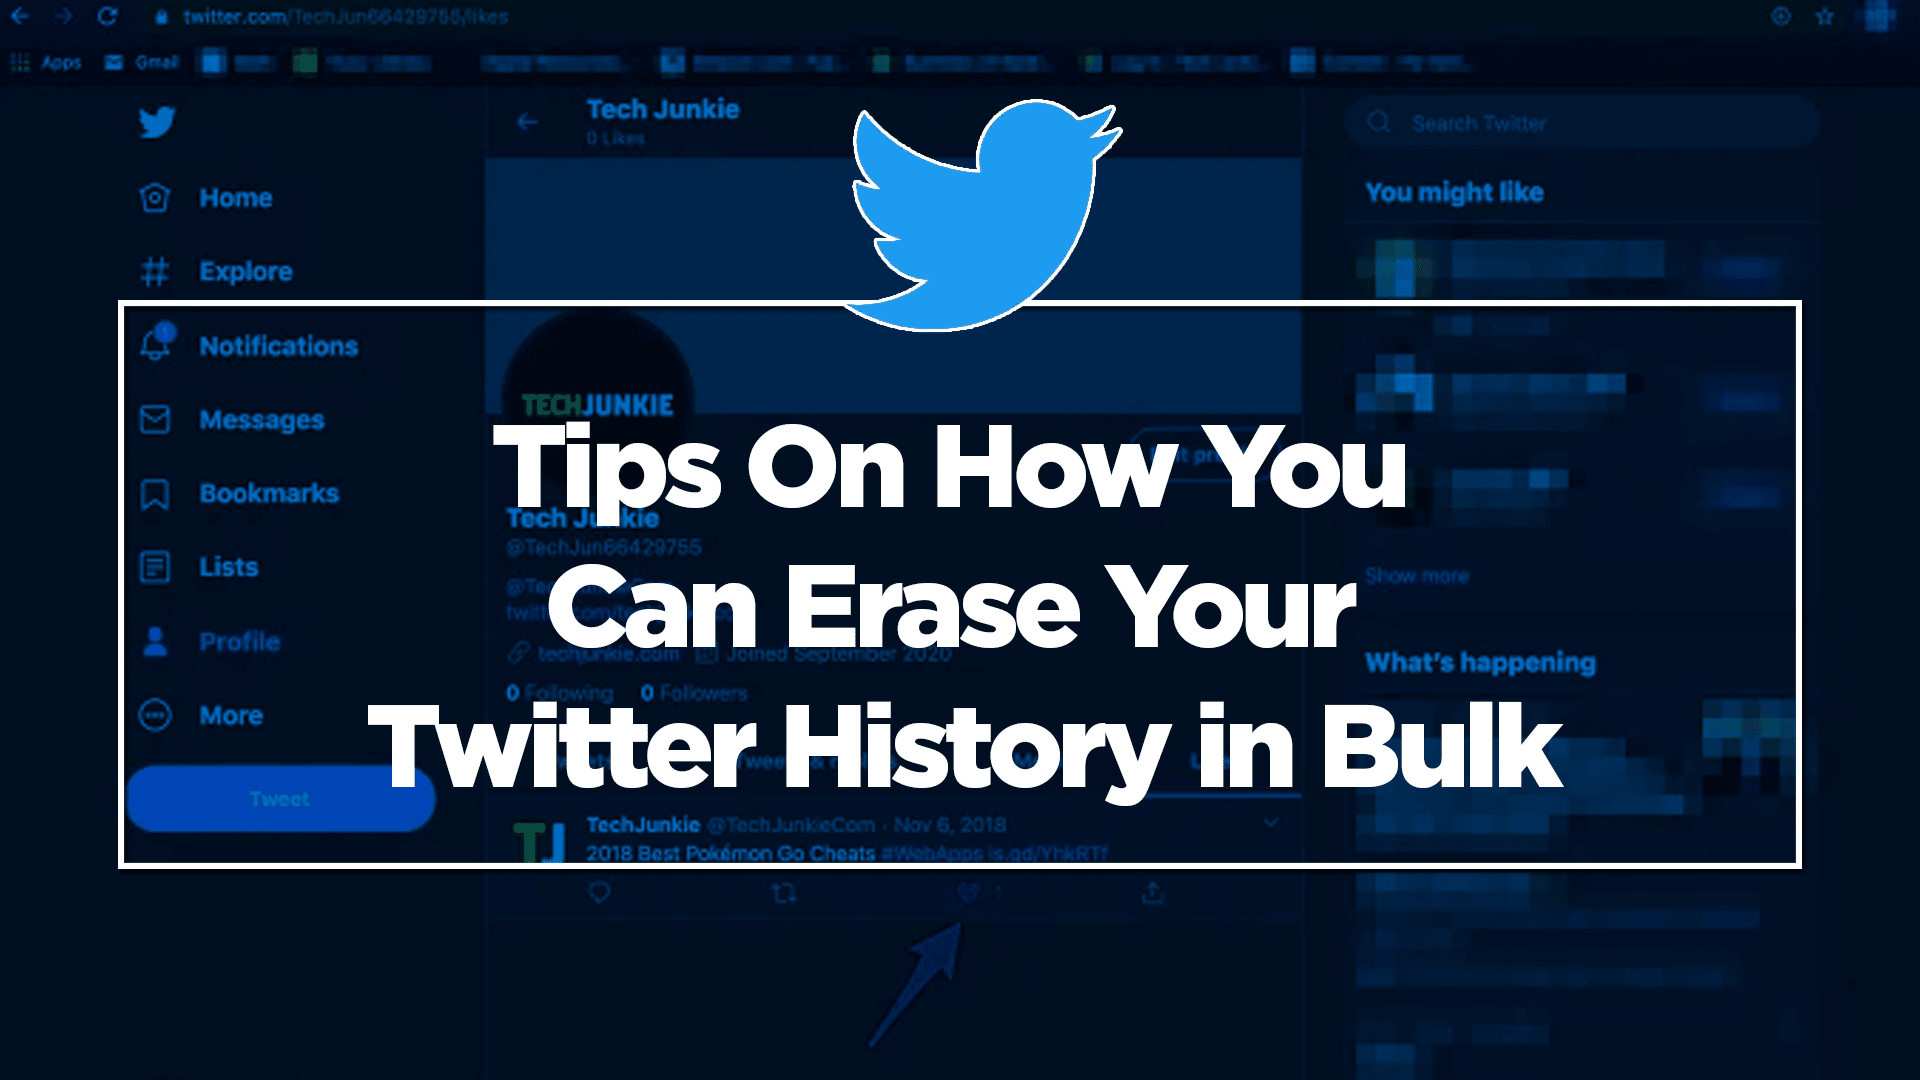 Tips On How You Can Erase Your Twitter History in Bulk